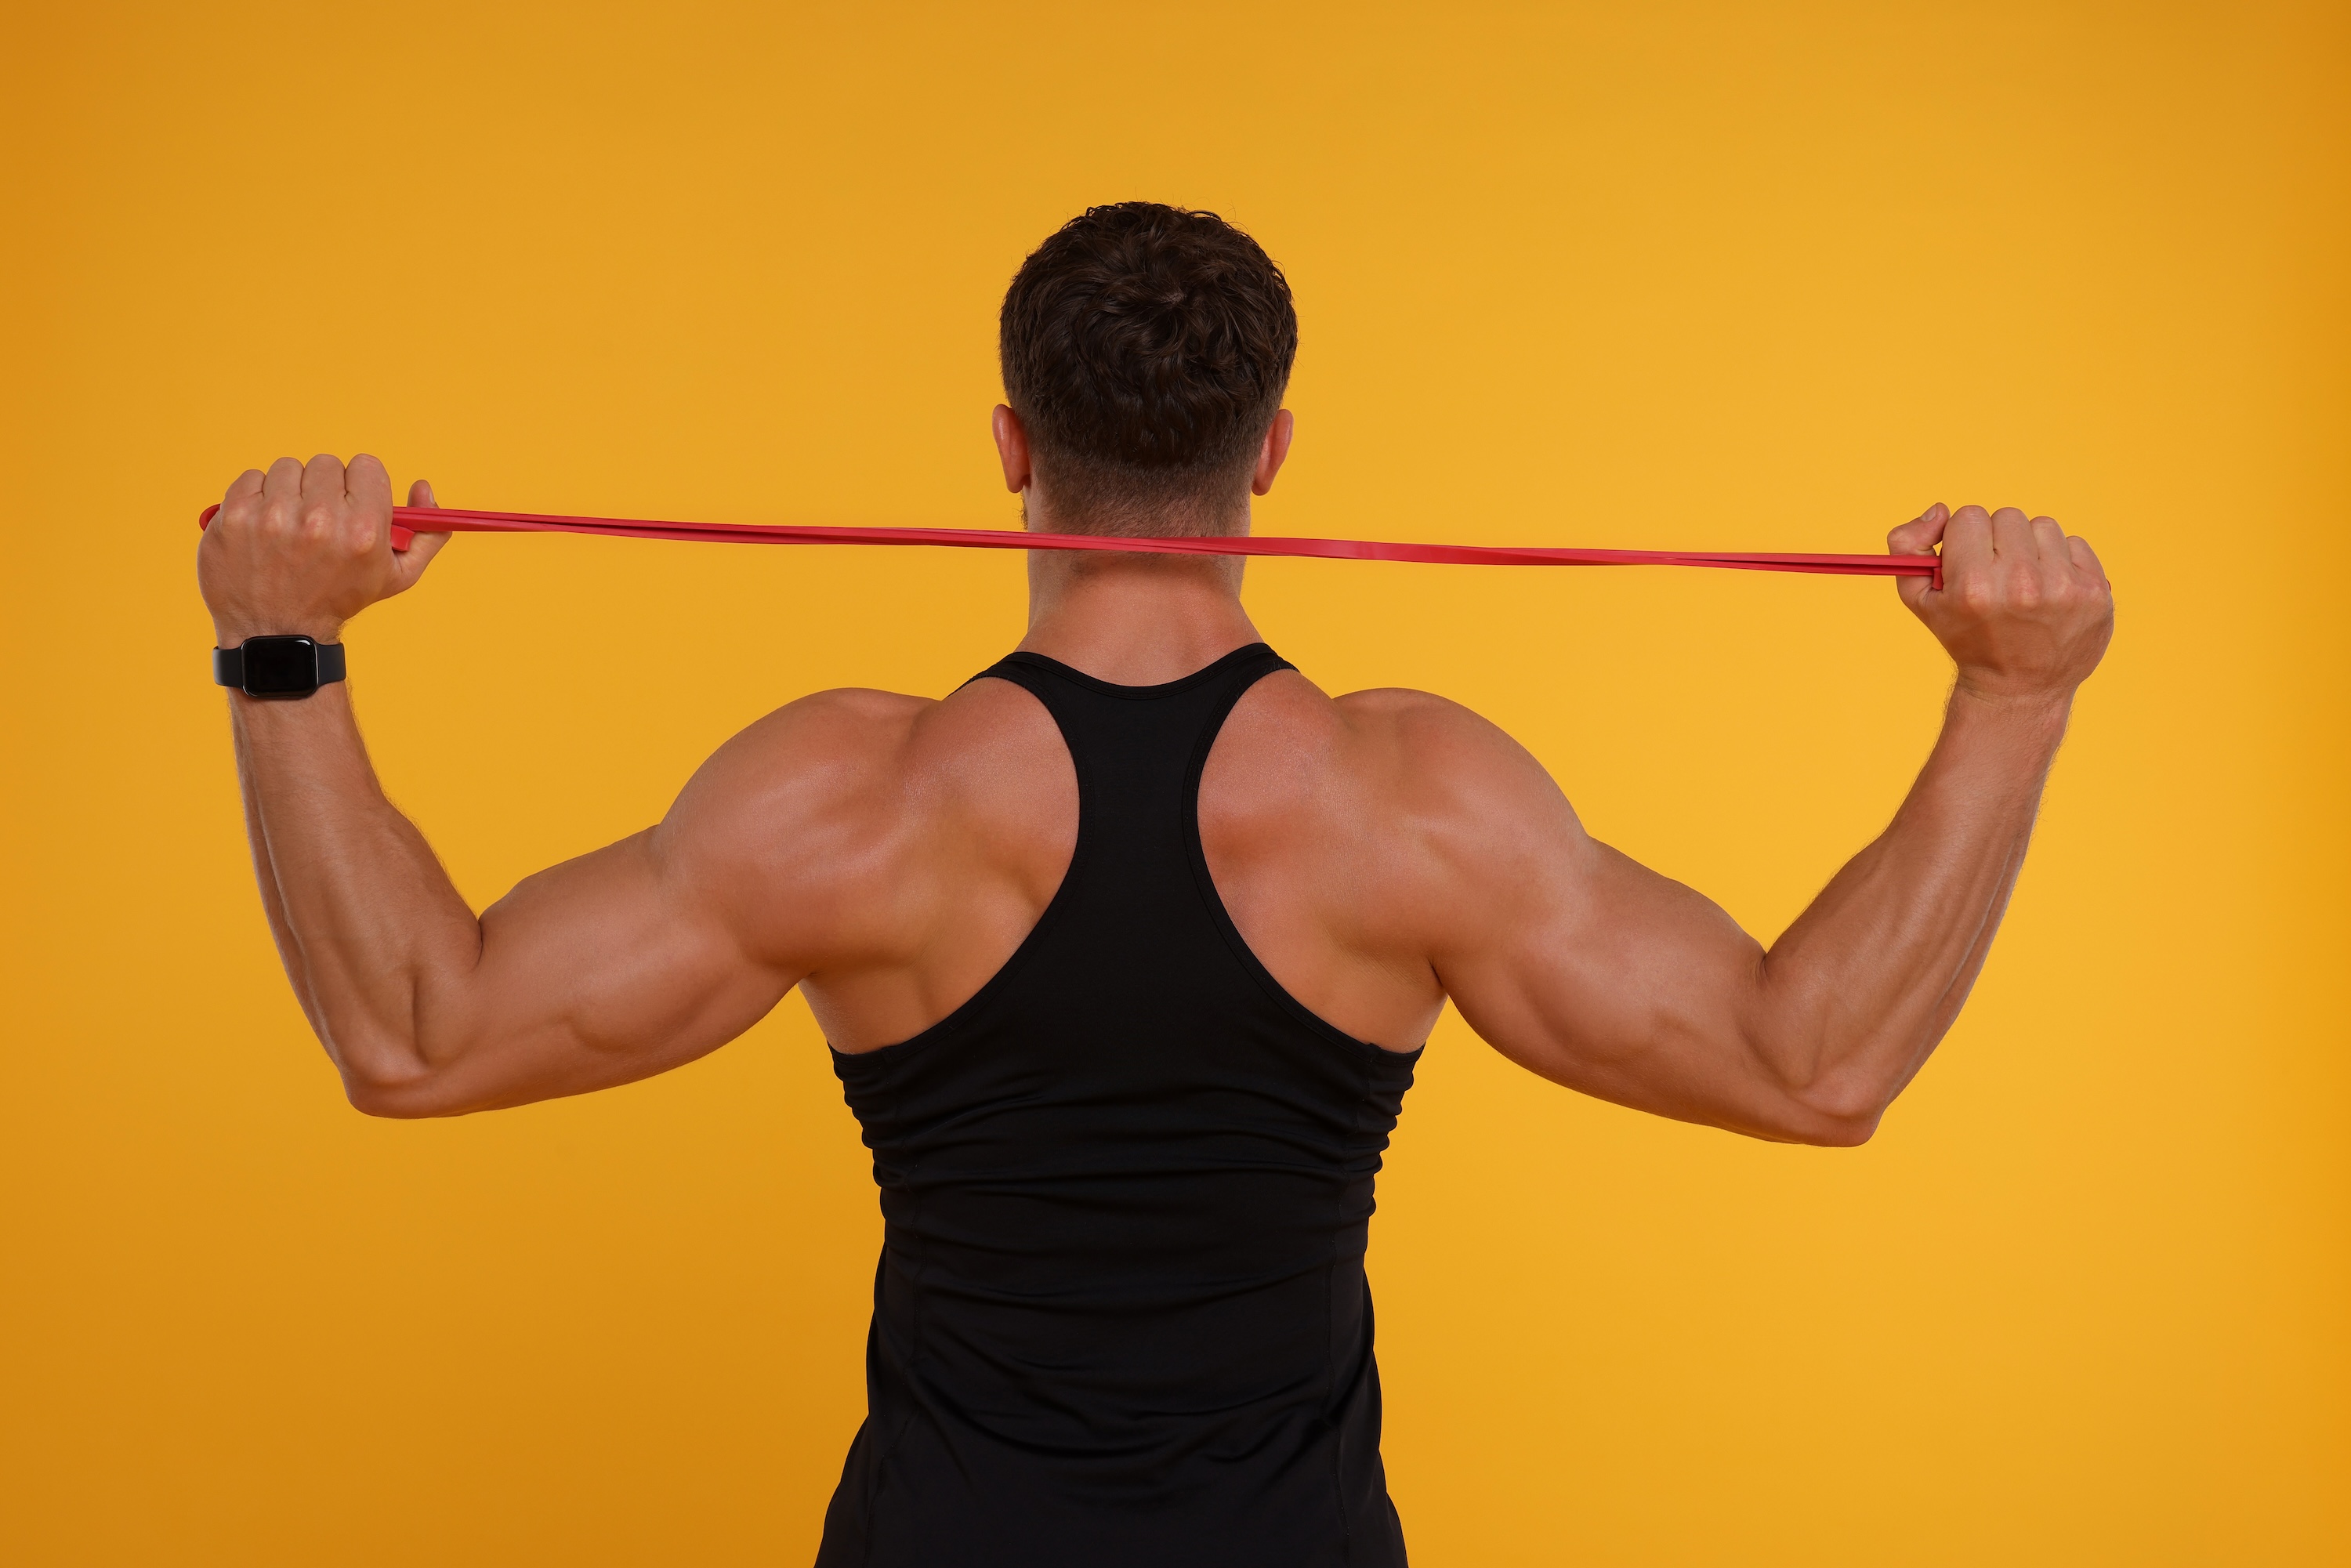 Young man exercising with elastic resistance band on orange background, back view